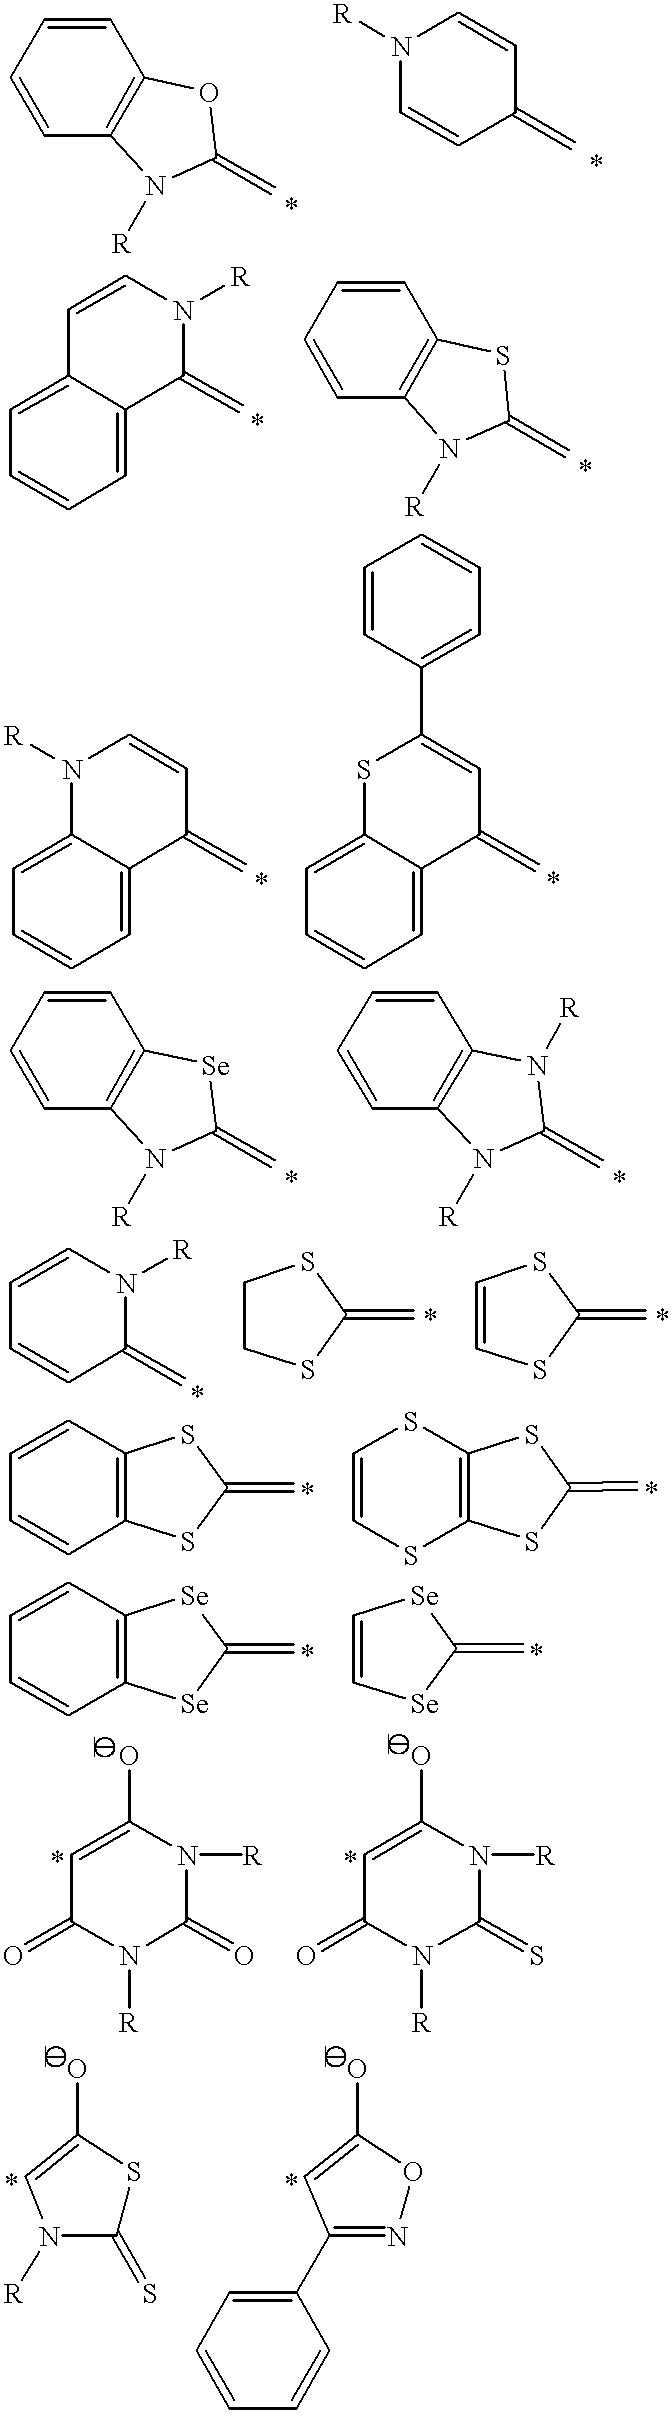 Thermally stable molecules with large dipole moments and polarizabilities and applications thereof